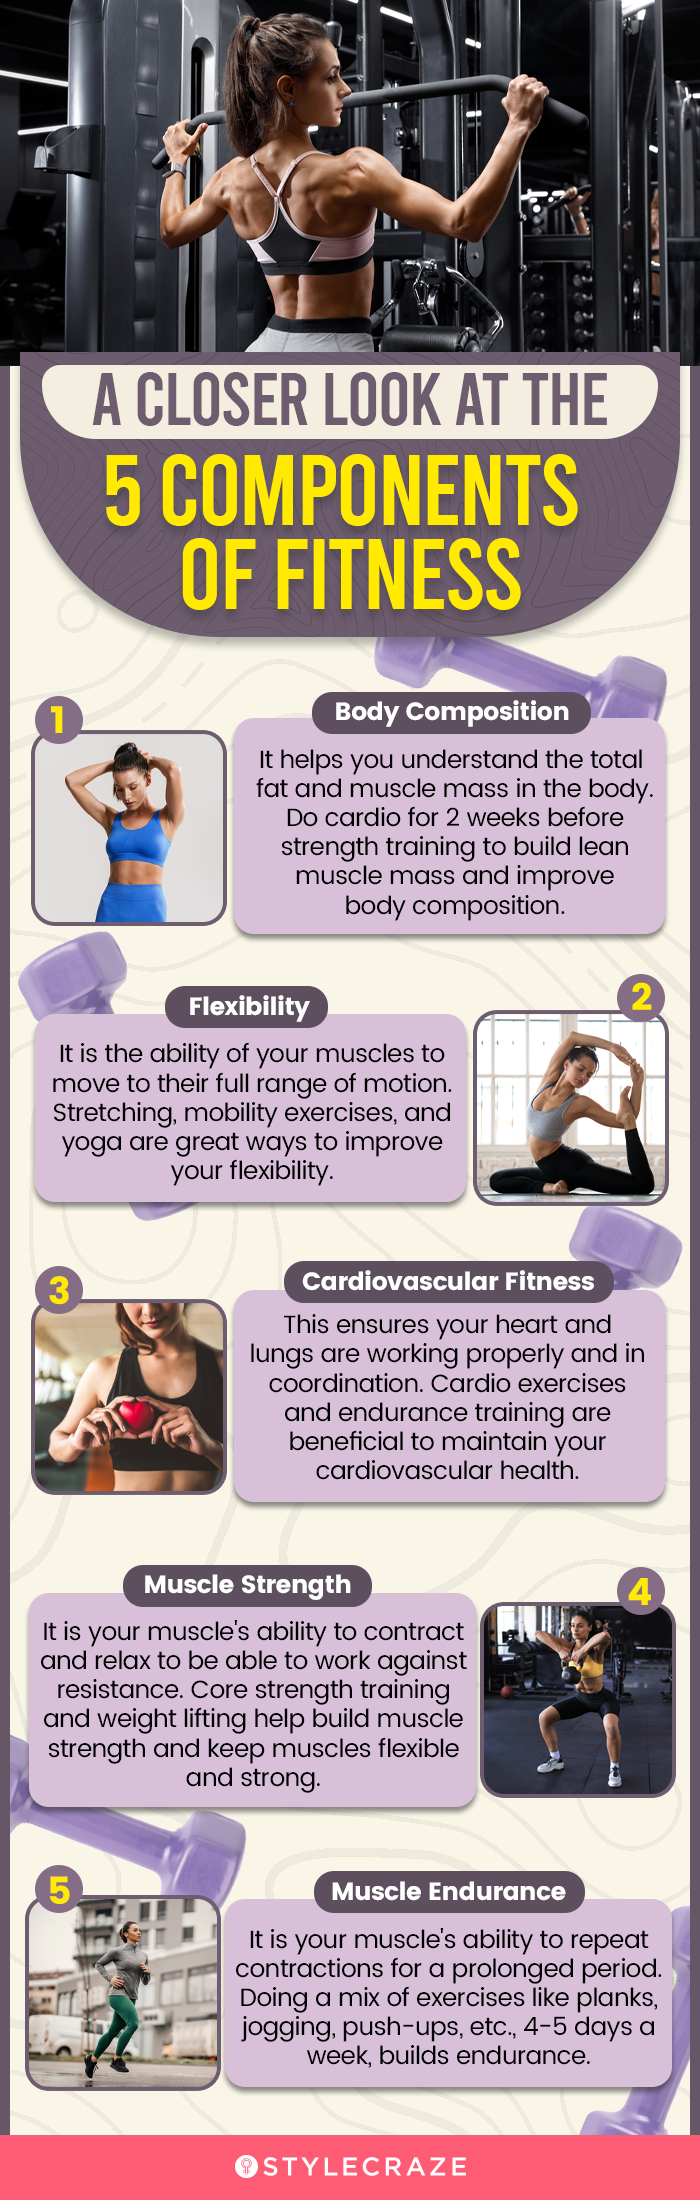 The Major Health Related Components Of Physical Fitness - How To